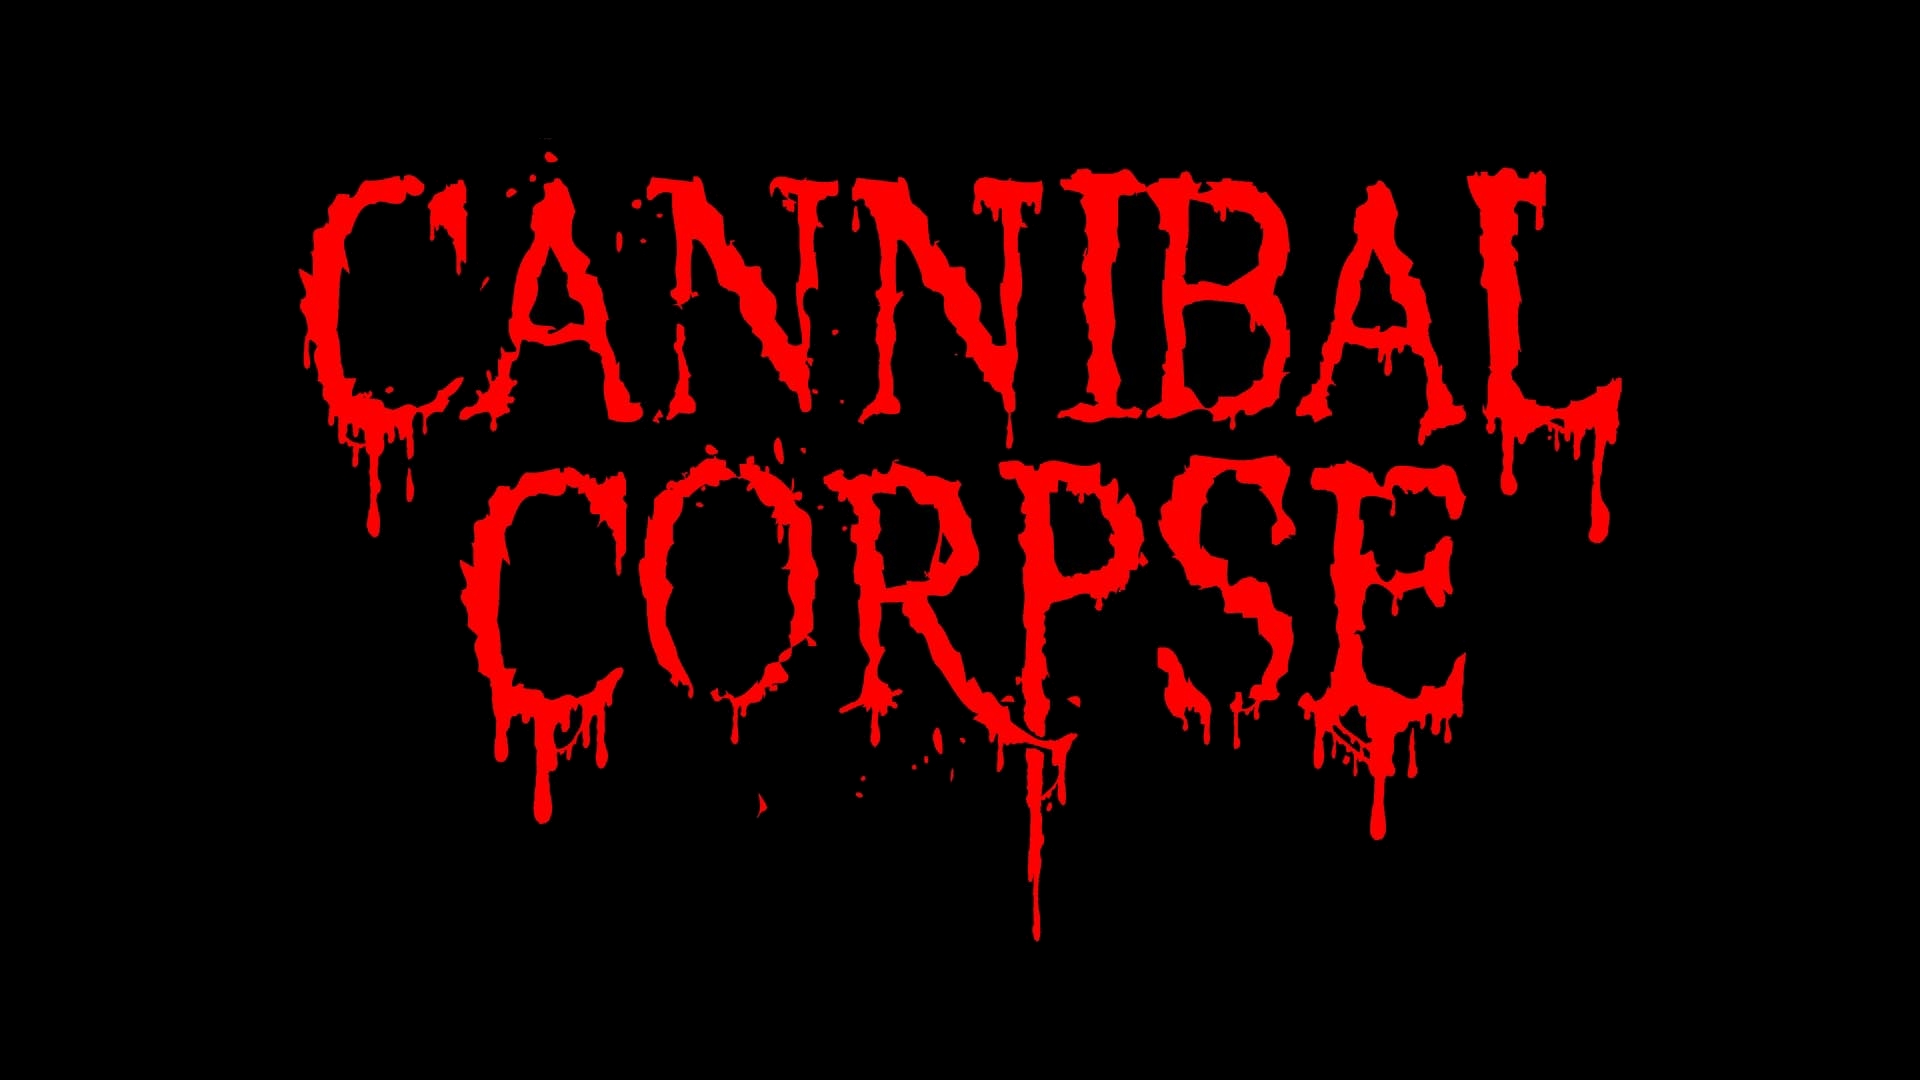 iPhone Wallpapers music Cannibal Corpse